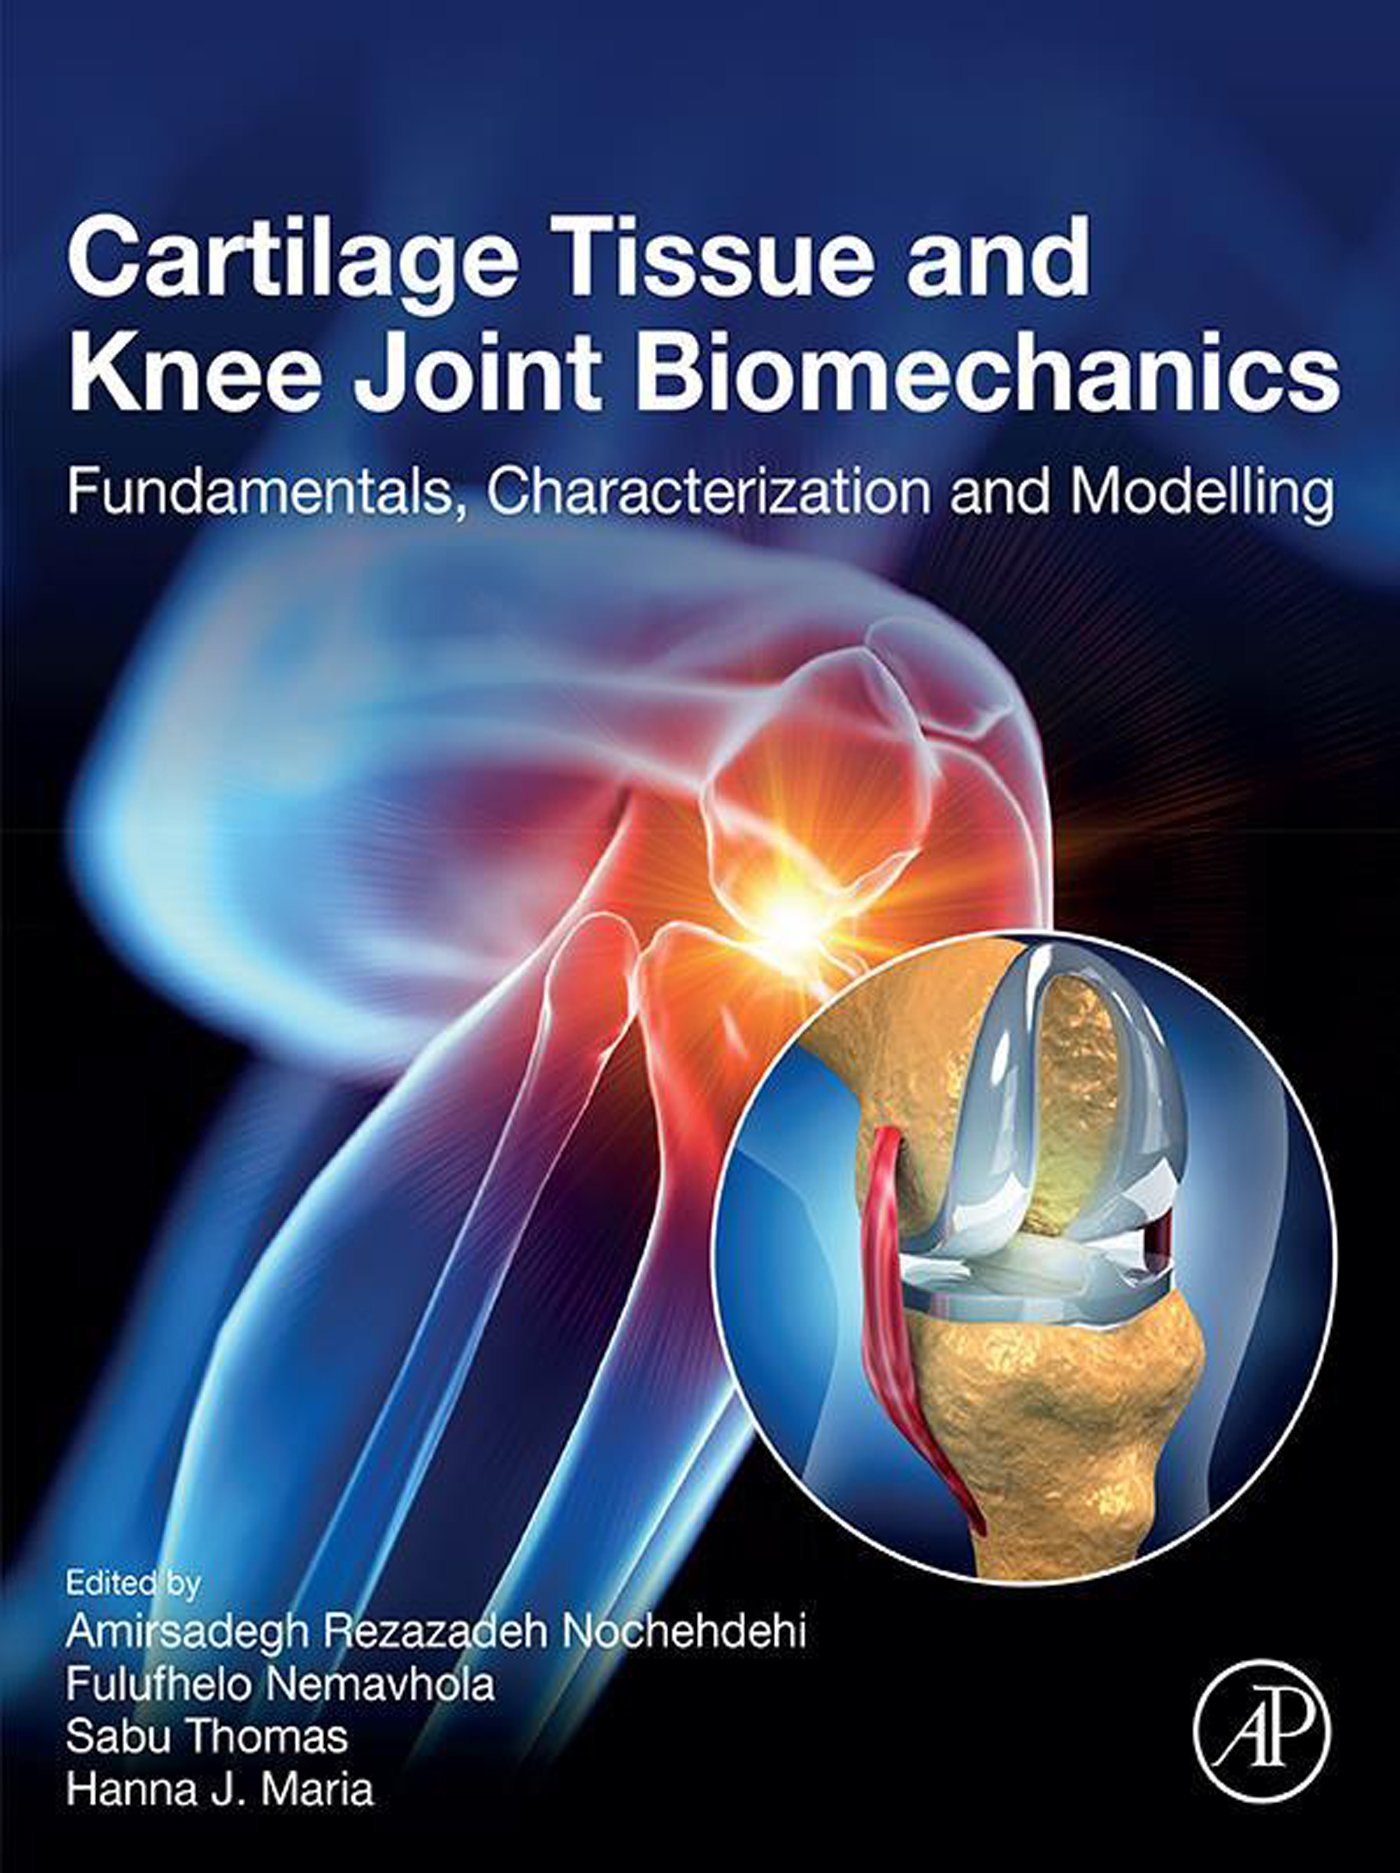 Cartilage Tissue And Knee Joint Biomechanics (Original Pdf From Publisher)